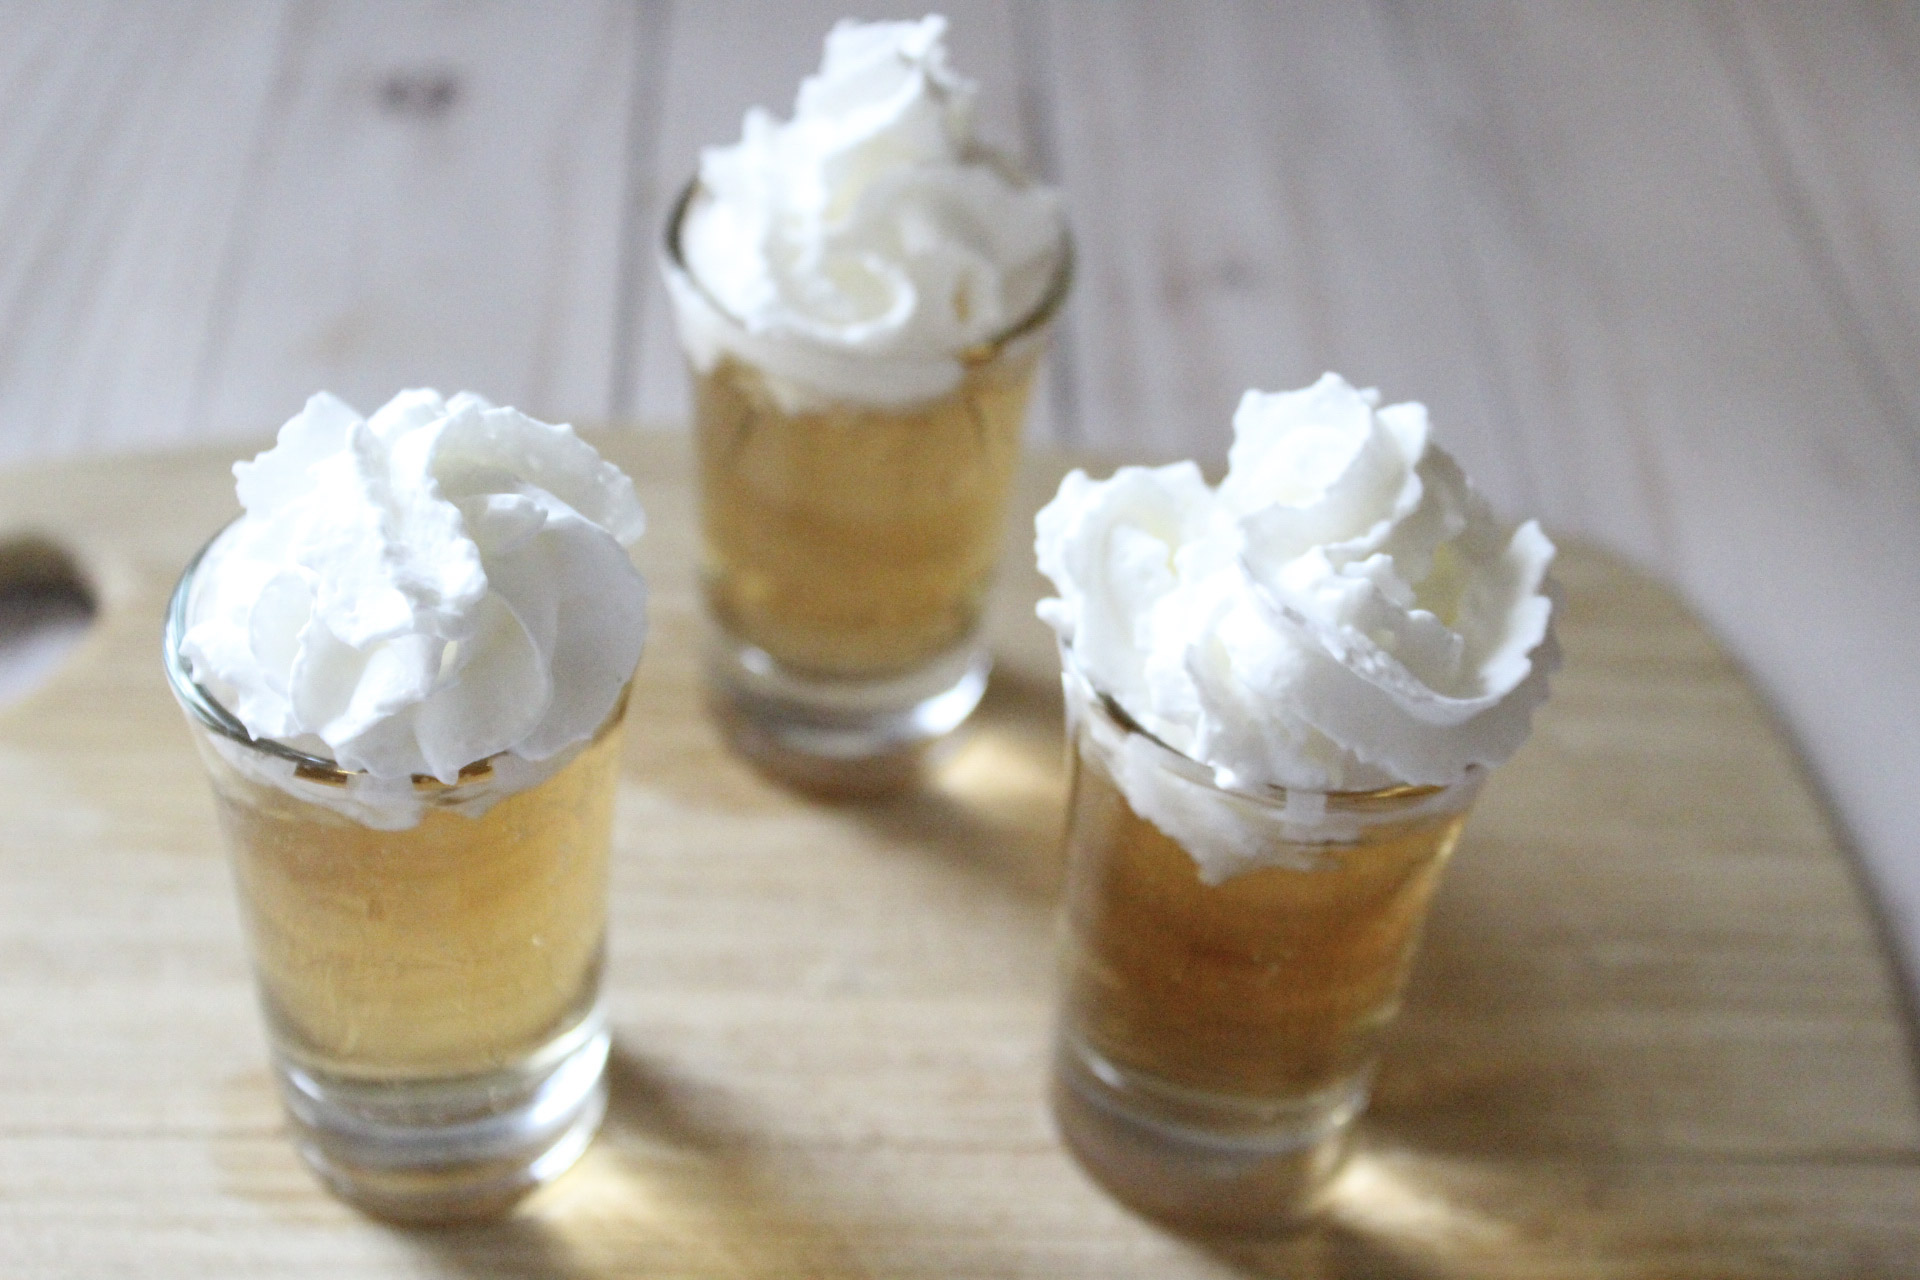 add whipped cream to top of butterbeer shots